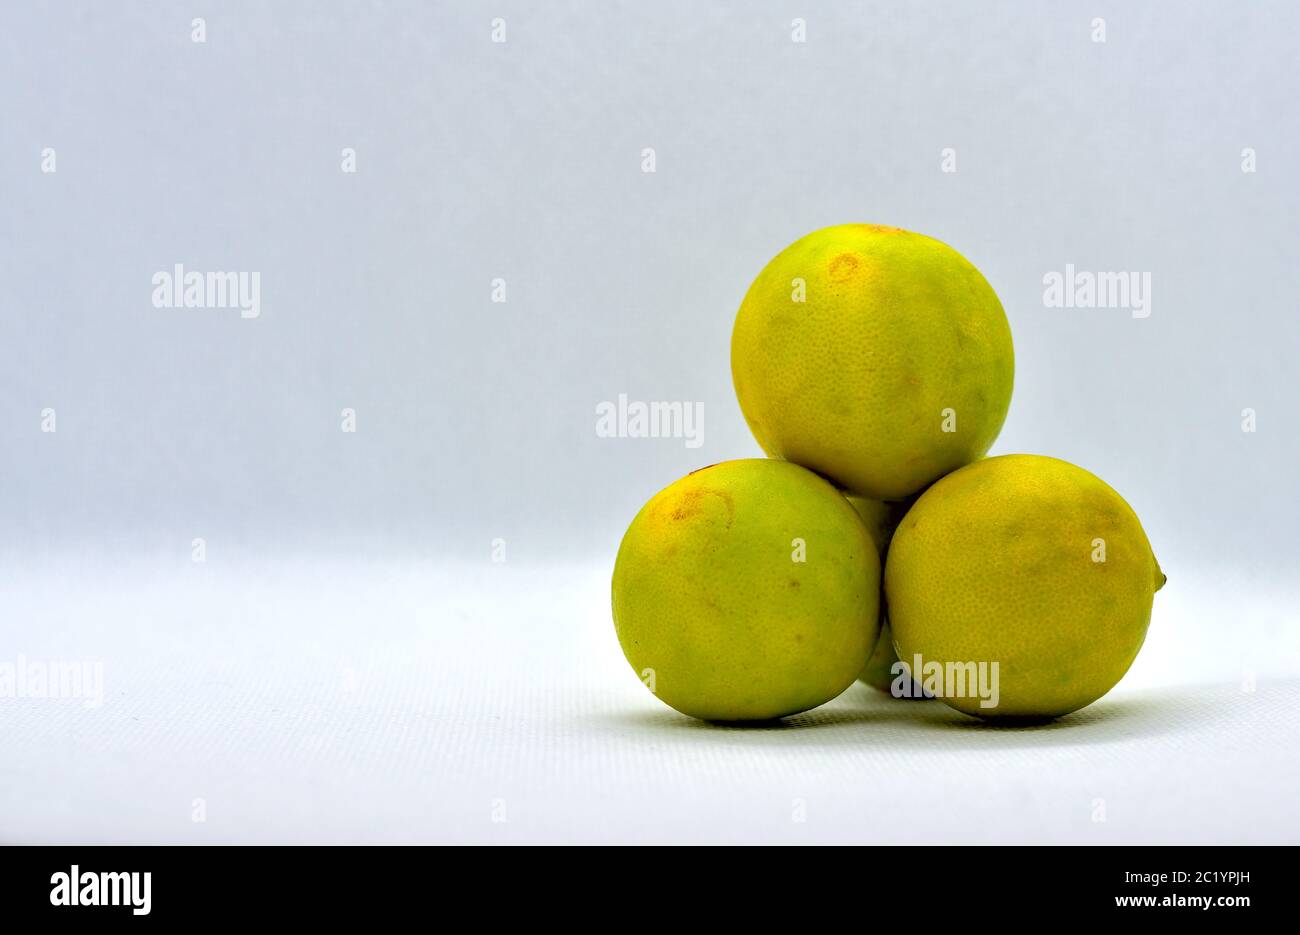 The lemon, Citrus limon, is a species of small evergreen tree in the flowering plant family Rutaceae, native to South Asia, primarily North eastern In Stock Photo